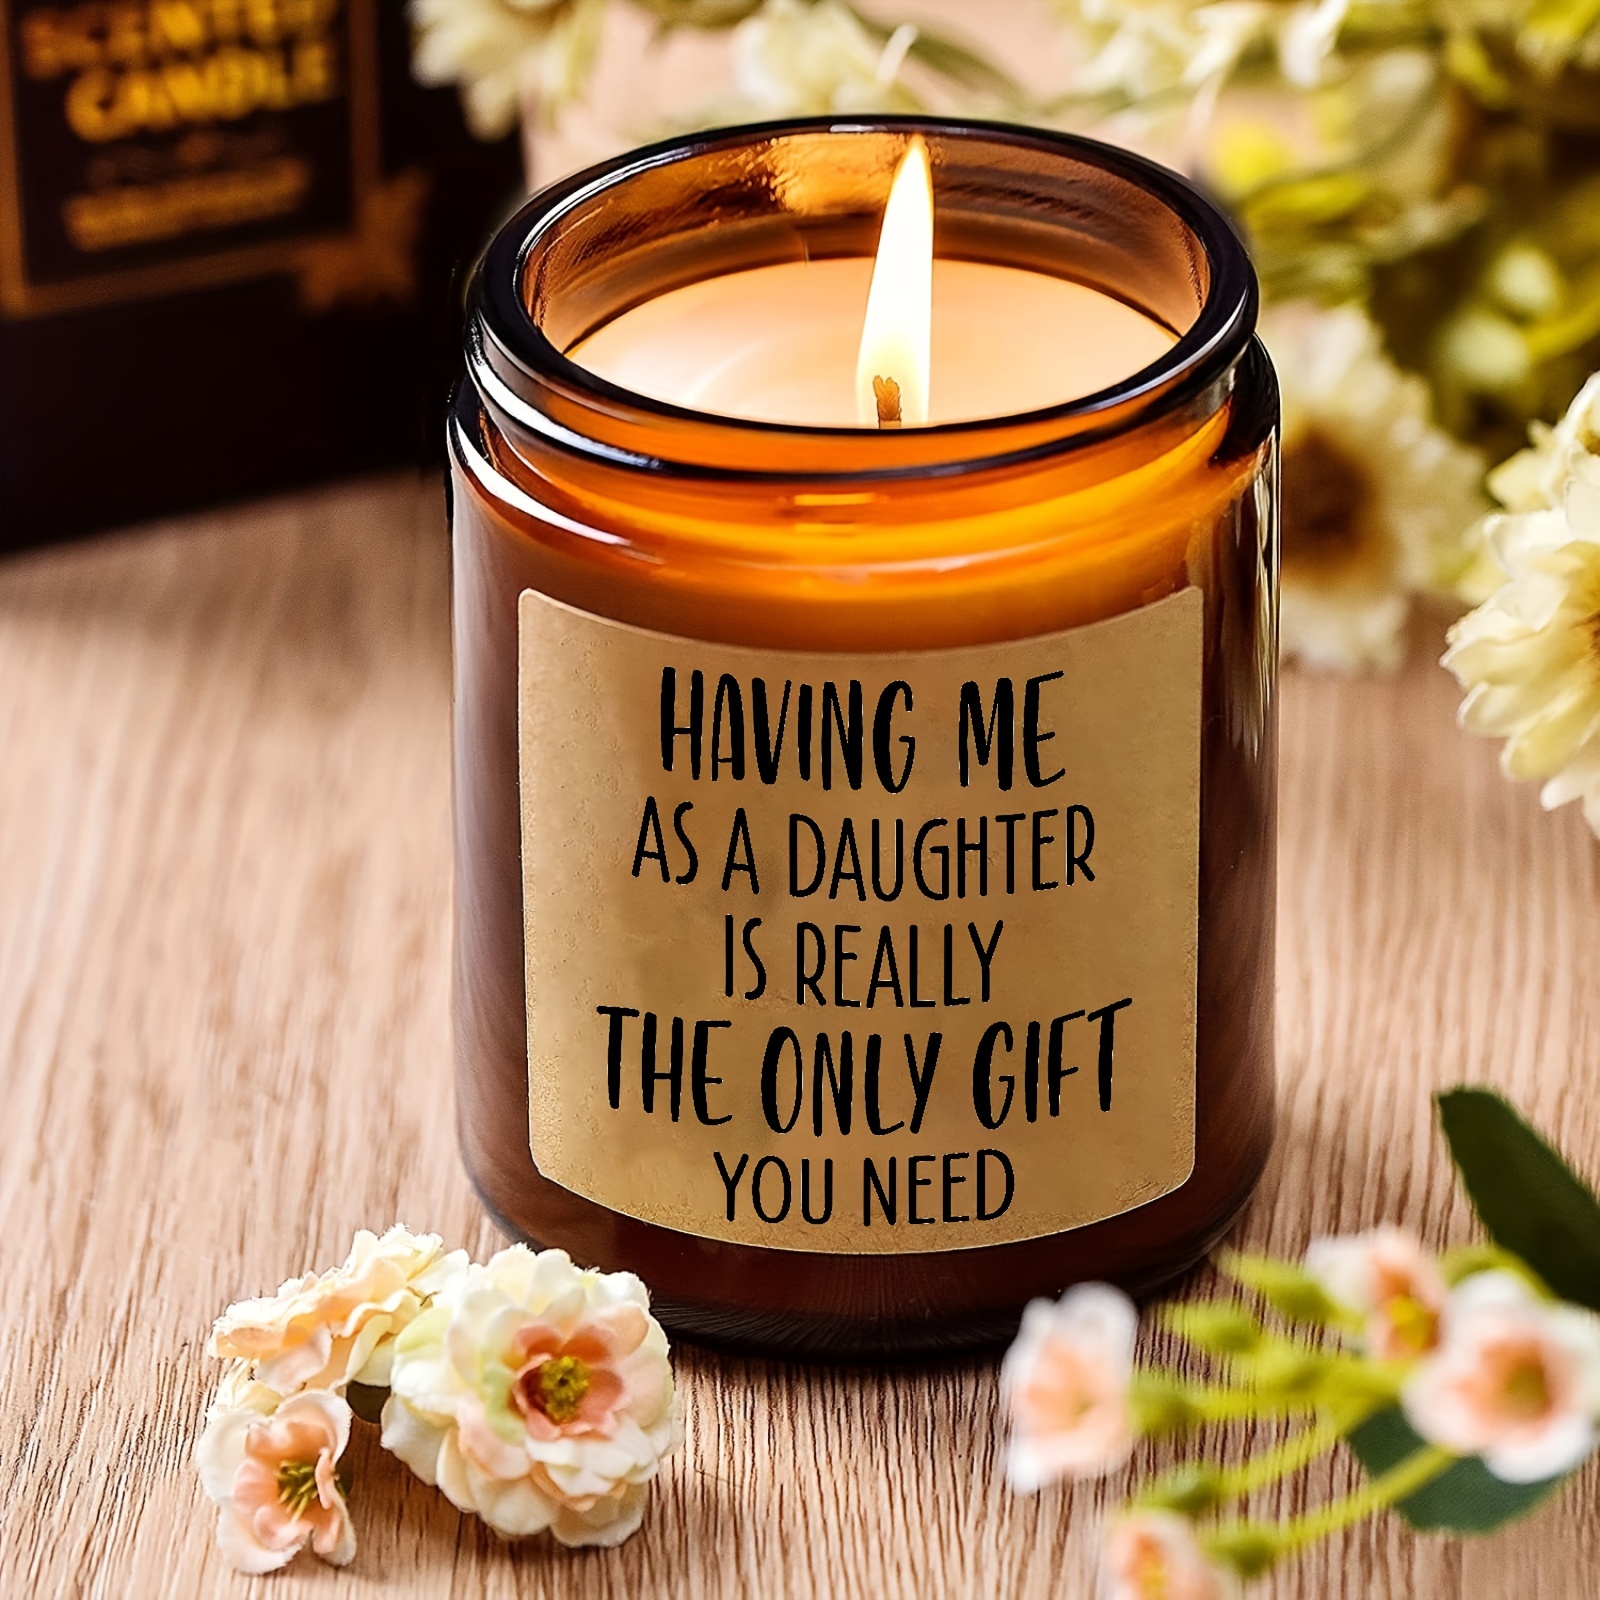 Gifts for Mom from Daughter, Mothers Day Gifts, Great Mother Gifts,  Birthday Gifts for Mom, Soy Wax Lavender Candles Gifts for Women